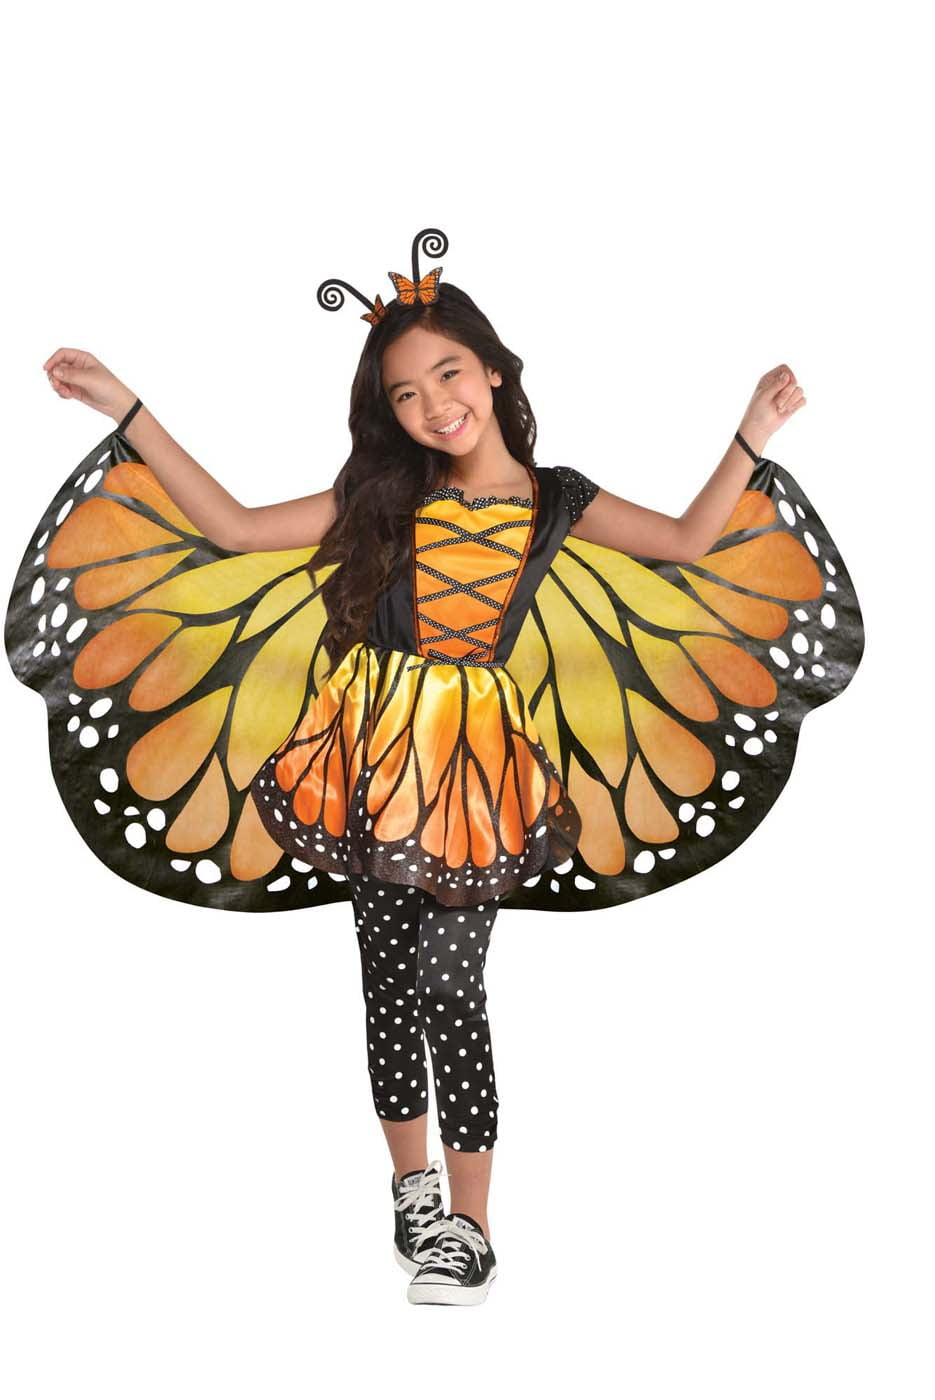 LADY BUTTERFLY Skeleton Halloween Costume & WINGS, Skeleton and ...